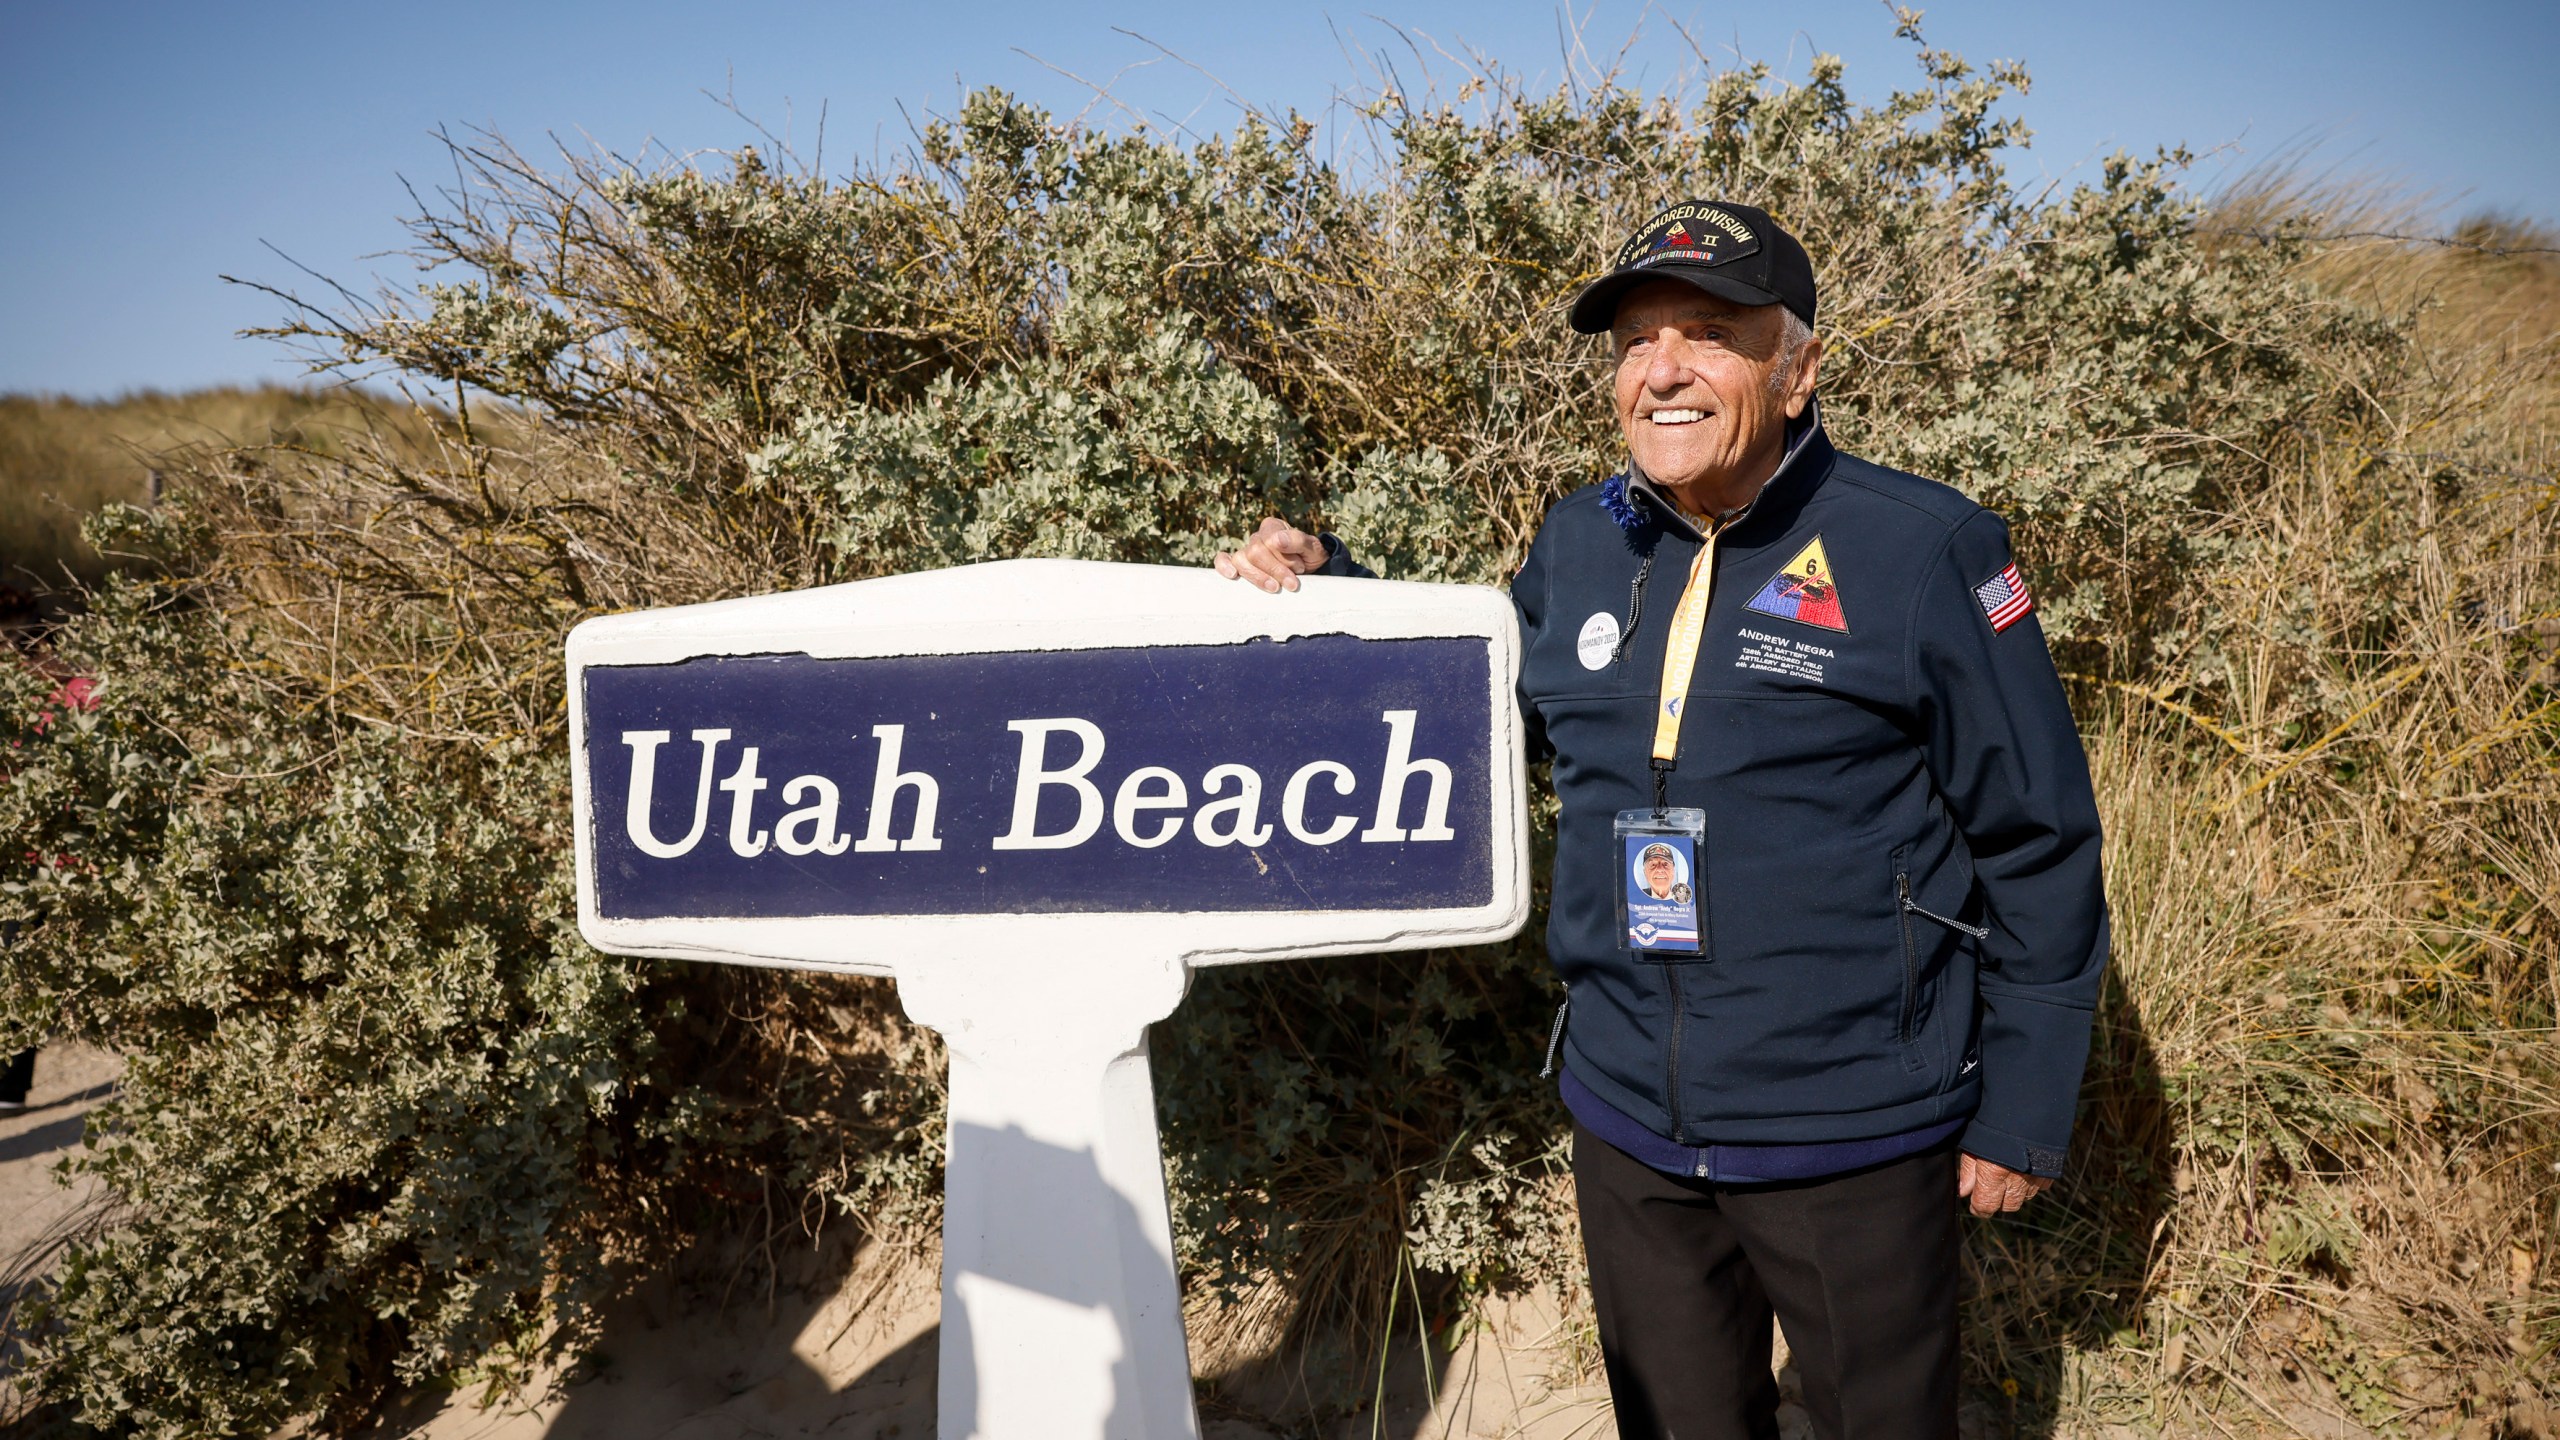 FILE - U.S. veteran Andrew Negra poses for a photo after the commemoration organized by the Best Defense Foundation at Utah Beach near Sainte-Marie-du-Mont, Normandy, France, Sunday, June 4, 2023, ahead of the D-Day Anniversary. French President Emmanuel Macron on Wednesday March 6, 2024 called on the public to collect photos, films, personal journals and testimony from witnesses to liberation at the end of World War Two, as the country prepares to mark the 80th anniversary of the Normandy landings which heralded the beginning of the end for Nazi Germany. (AP Photo/Thomas Padilla, File)